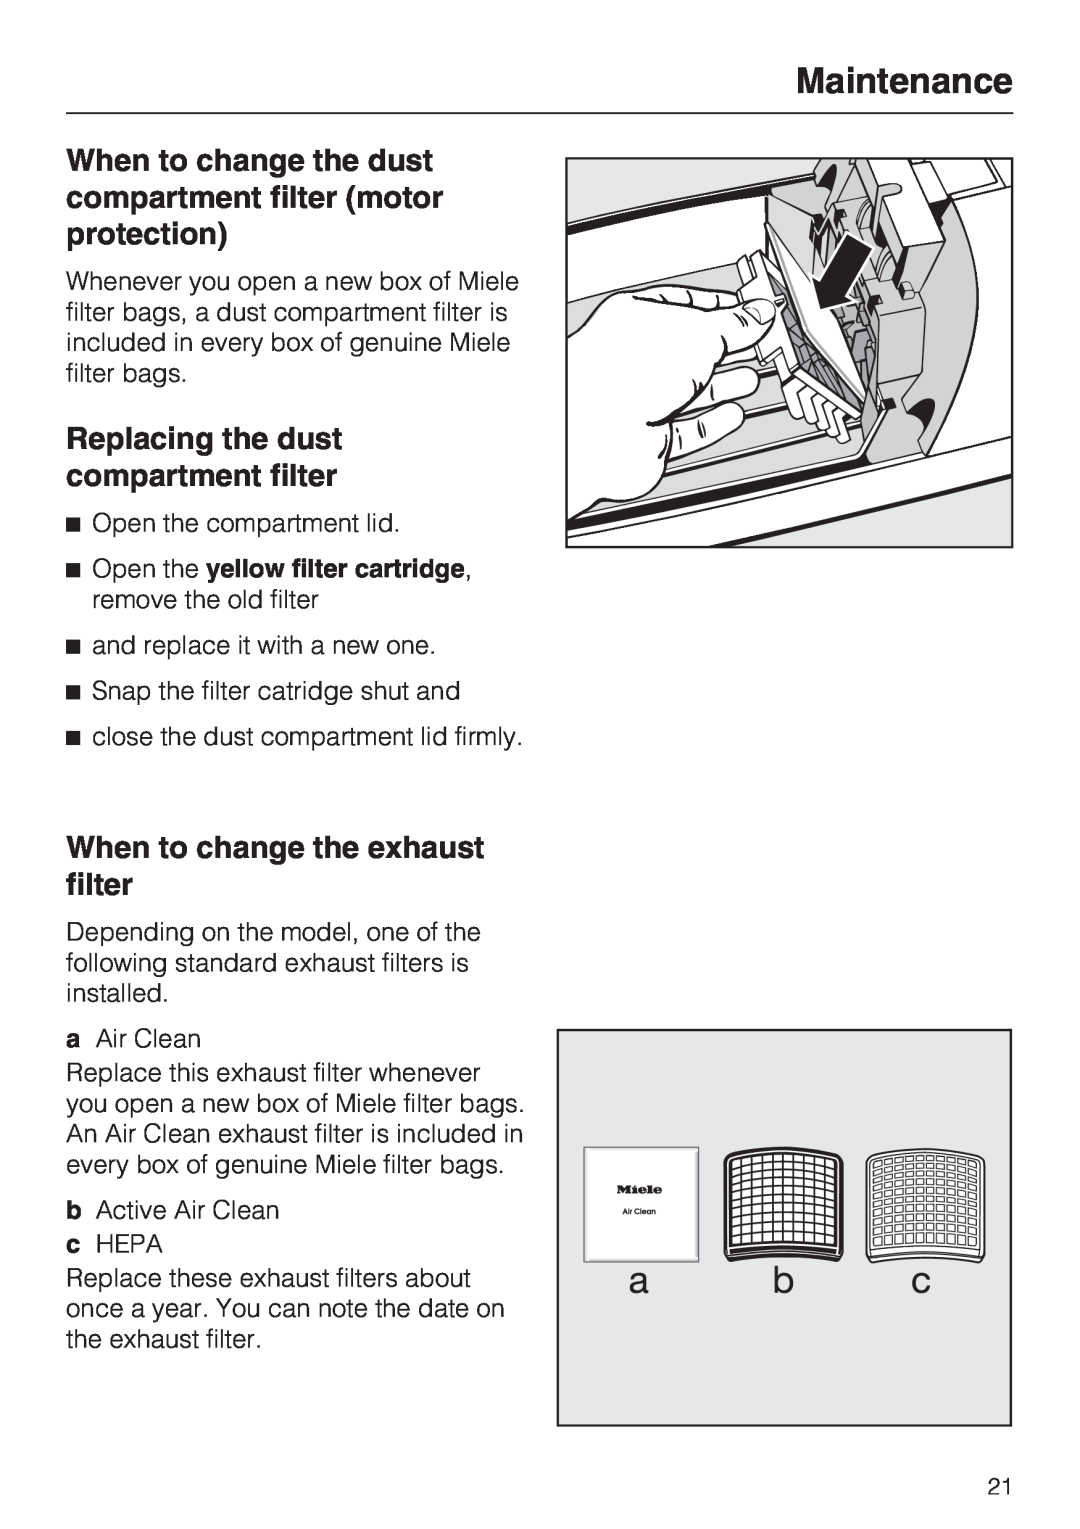 Miele S 190 operating instructions Replacing the dust compartment filter, When to change the exhaust filter, Maintenance 